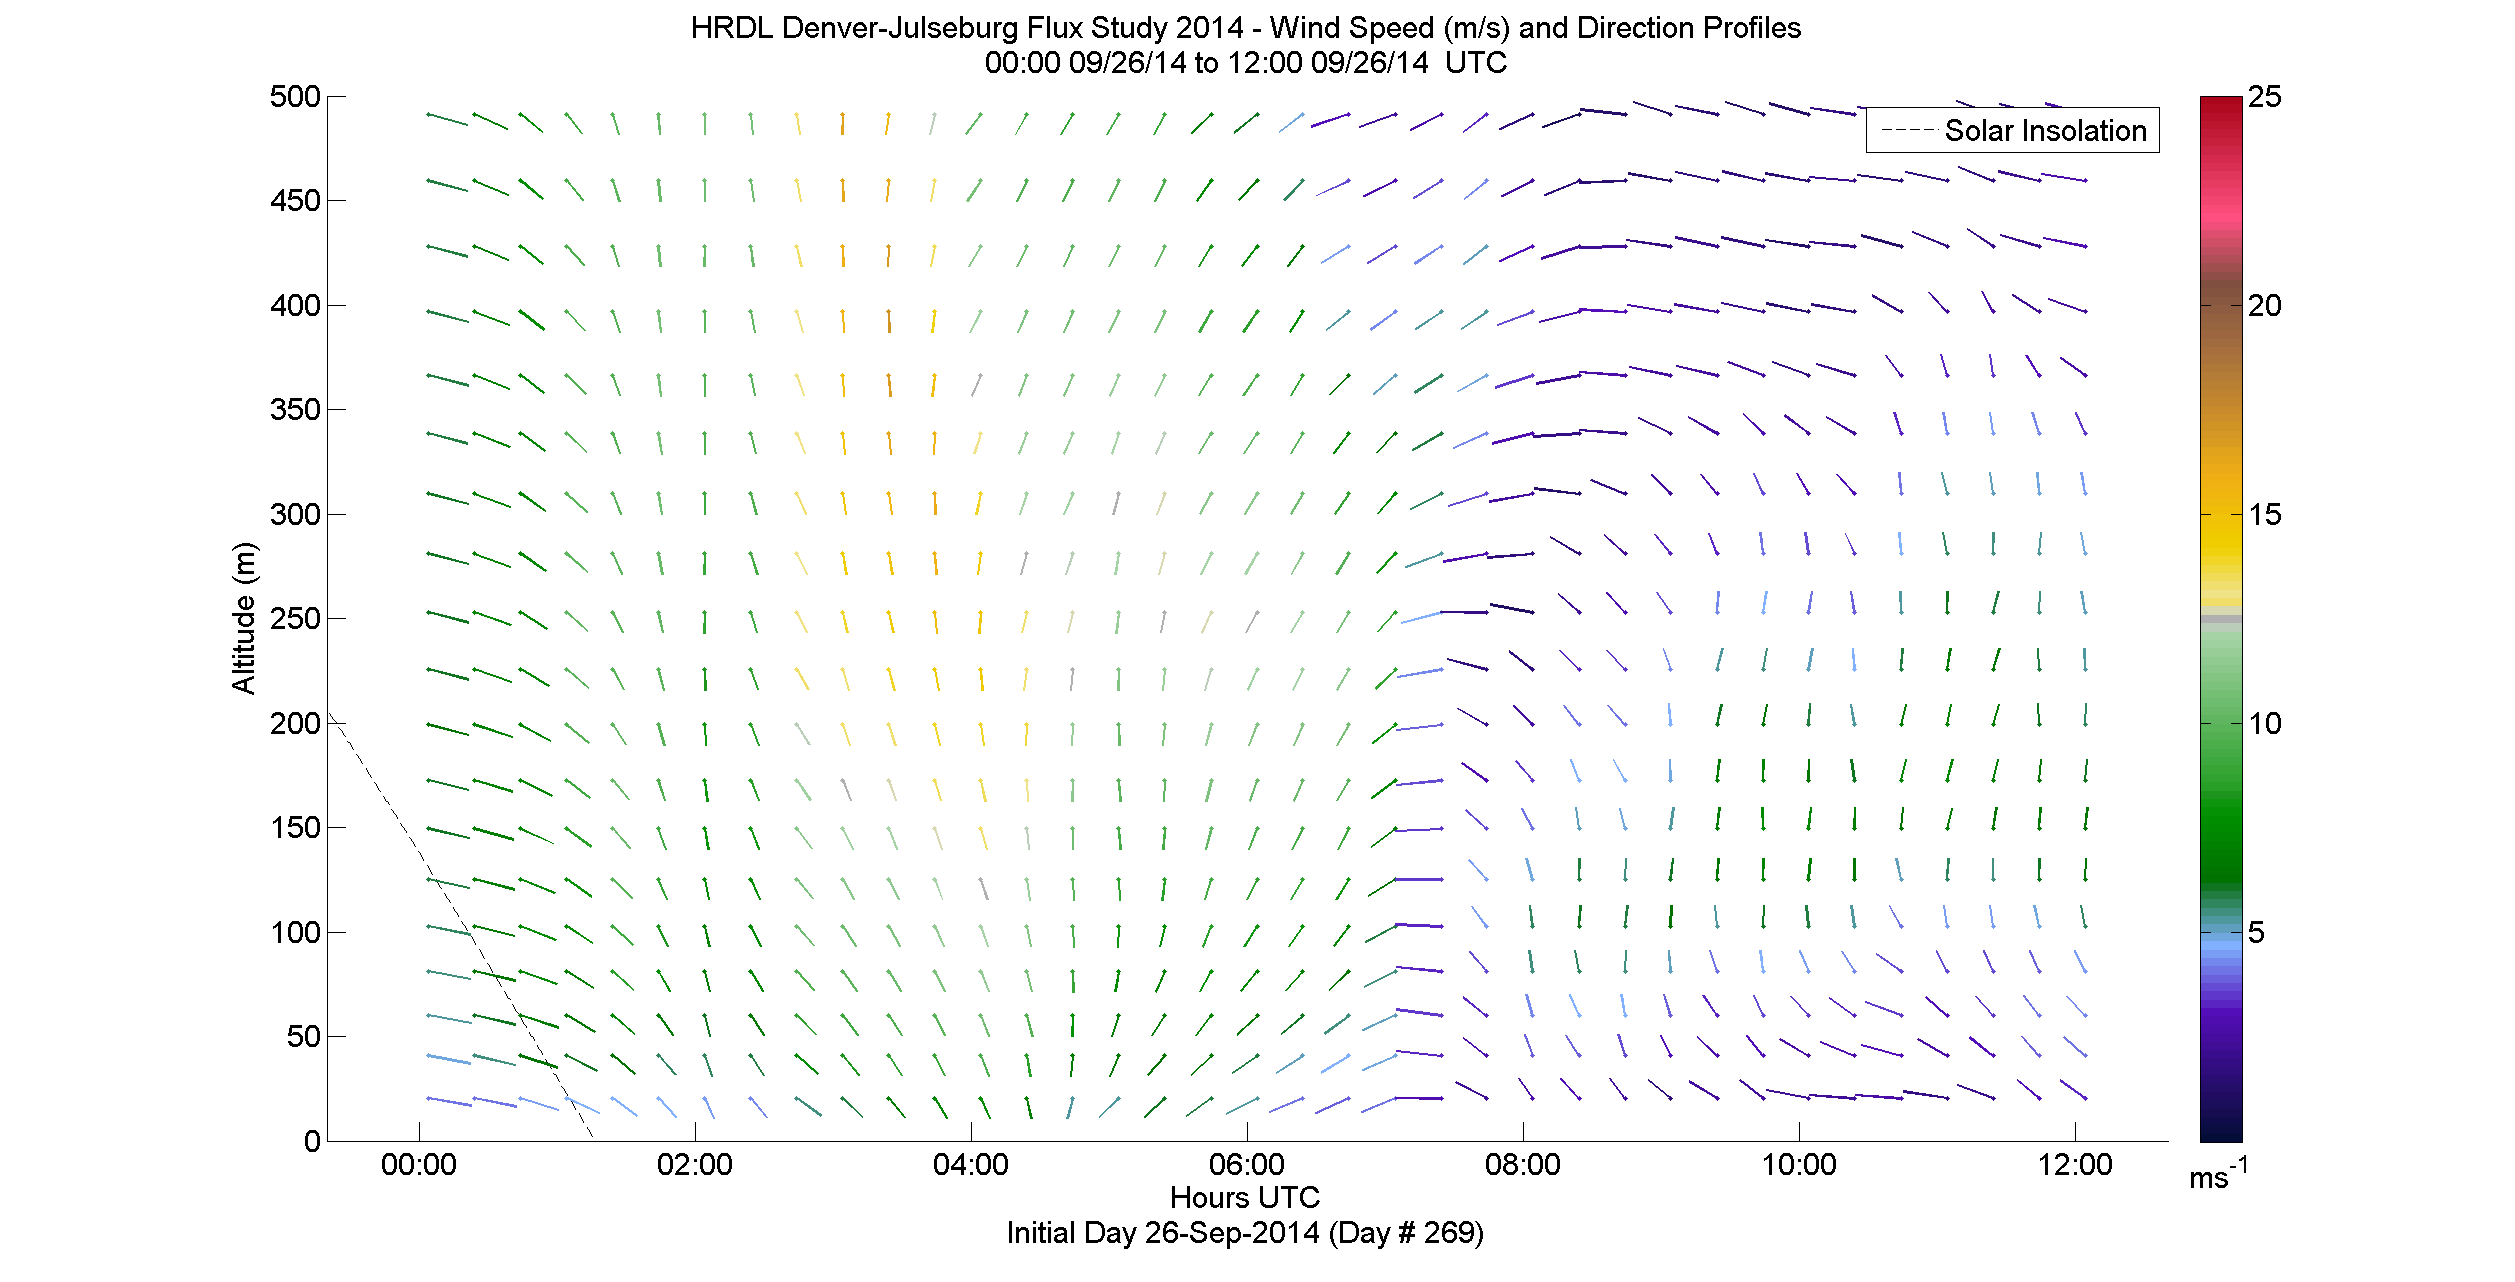 HRDL speed and direction profile - September 26 am